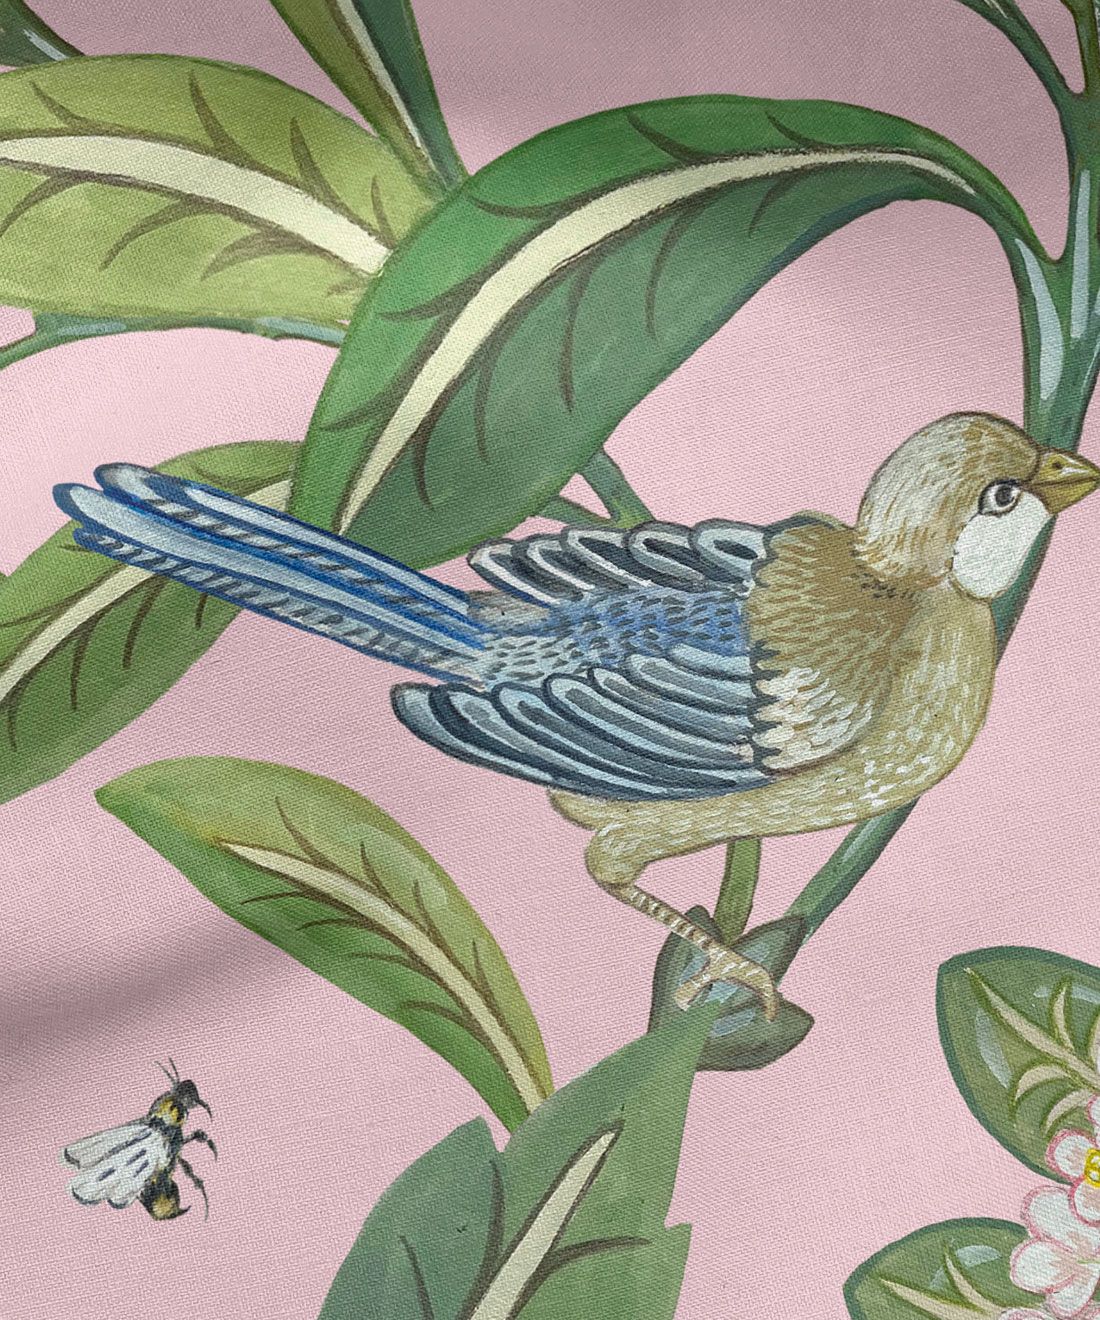 Summer Garden Fabric • Bethany Linz • Bird and Plant Fabric • Pink Upholstery Fabric